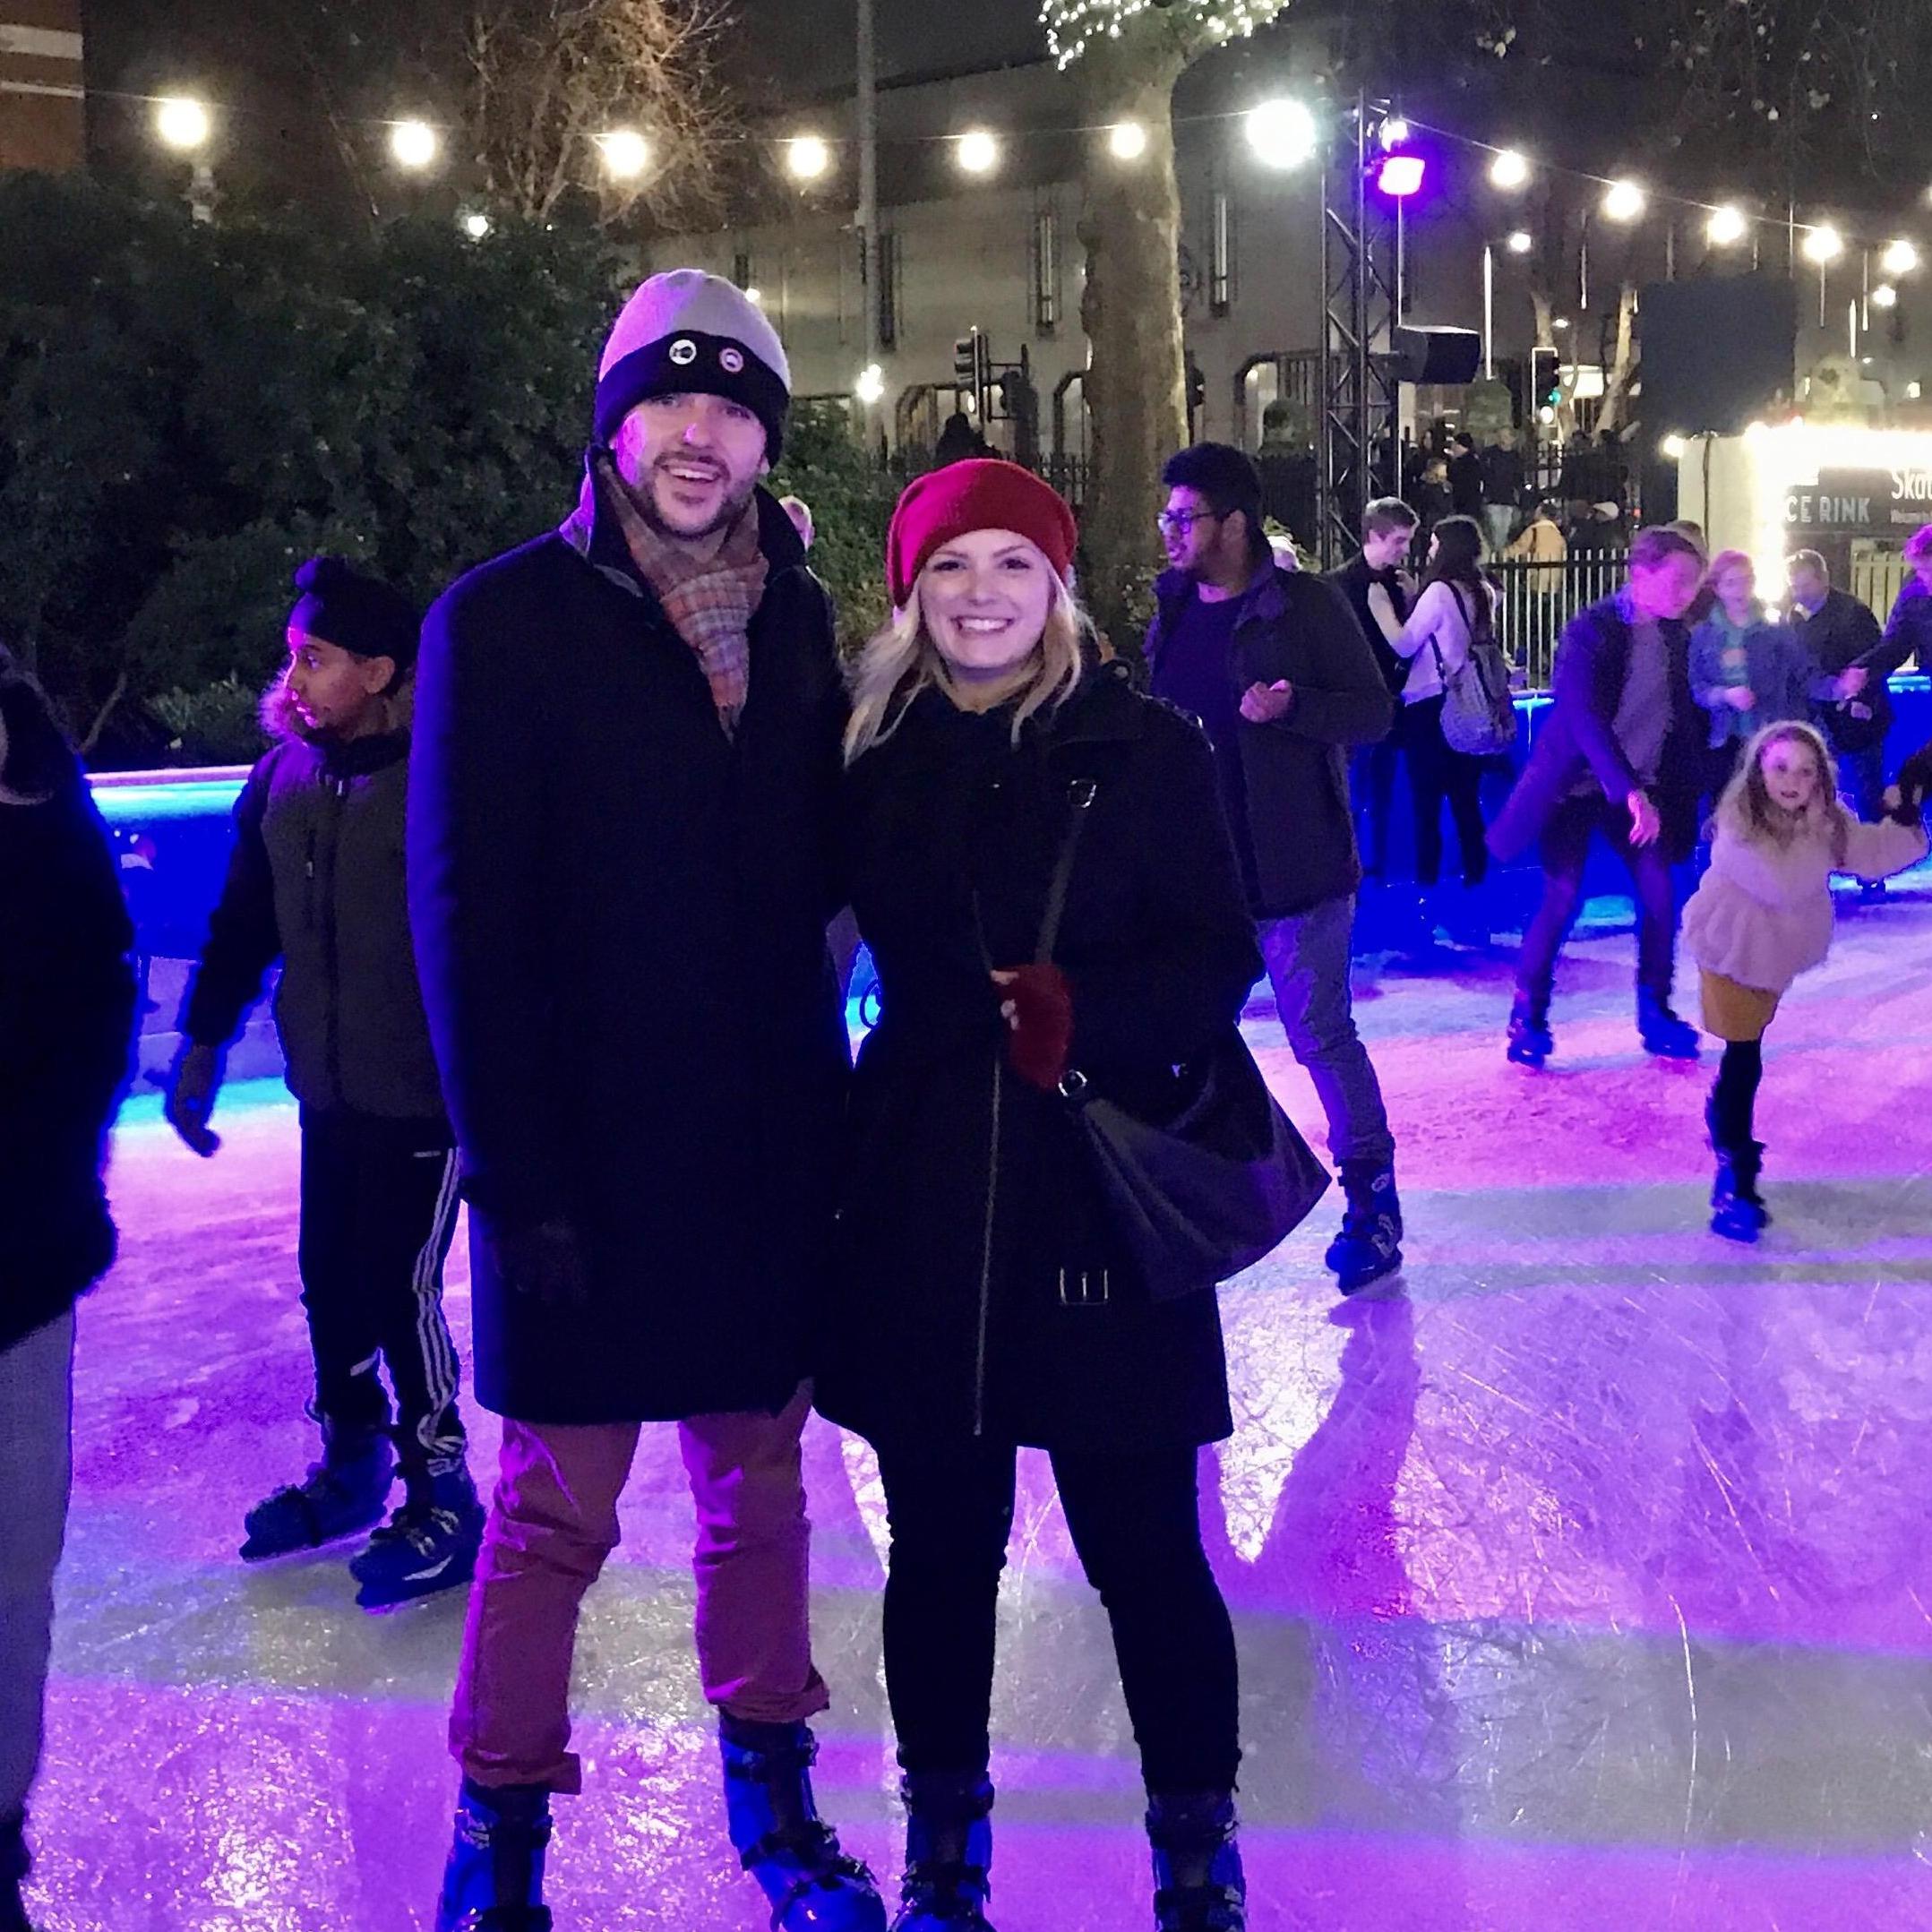 Ice skating at the Natural History Museum in London
2017